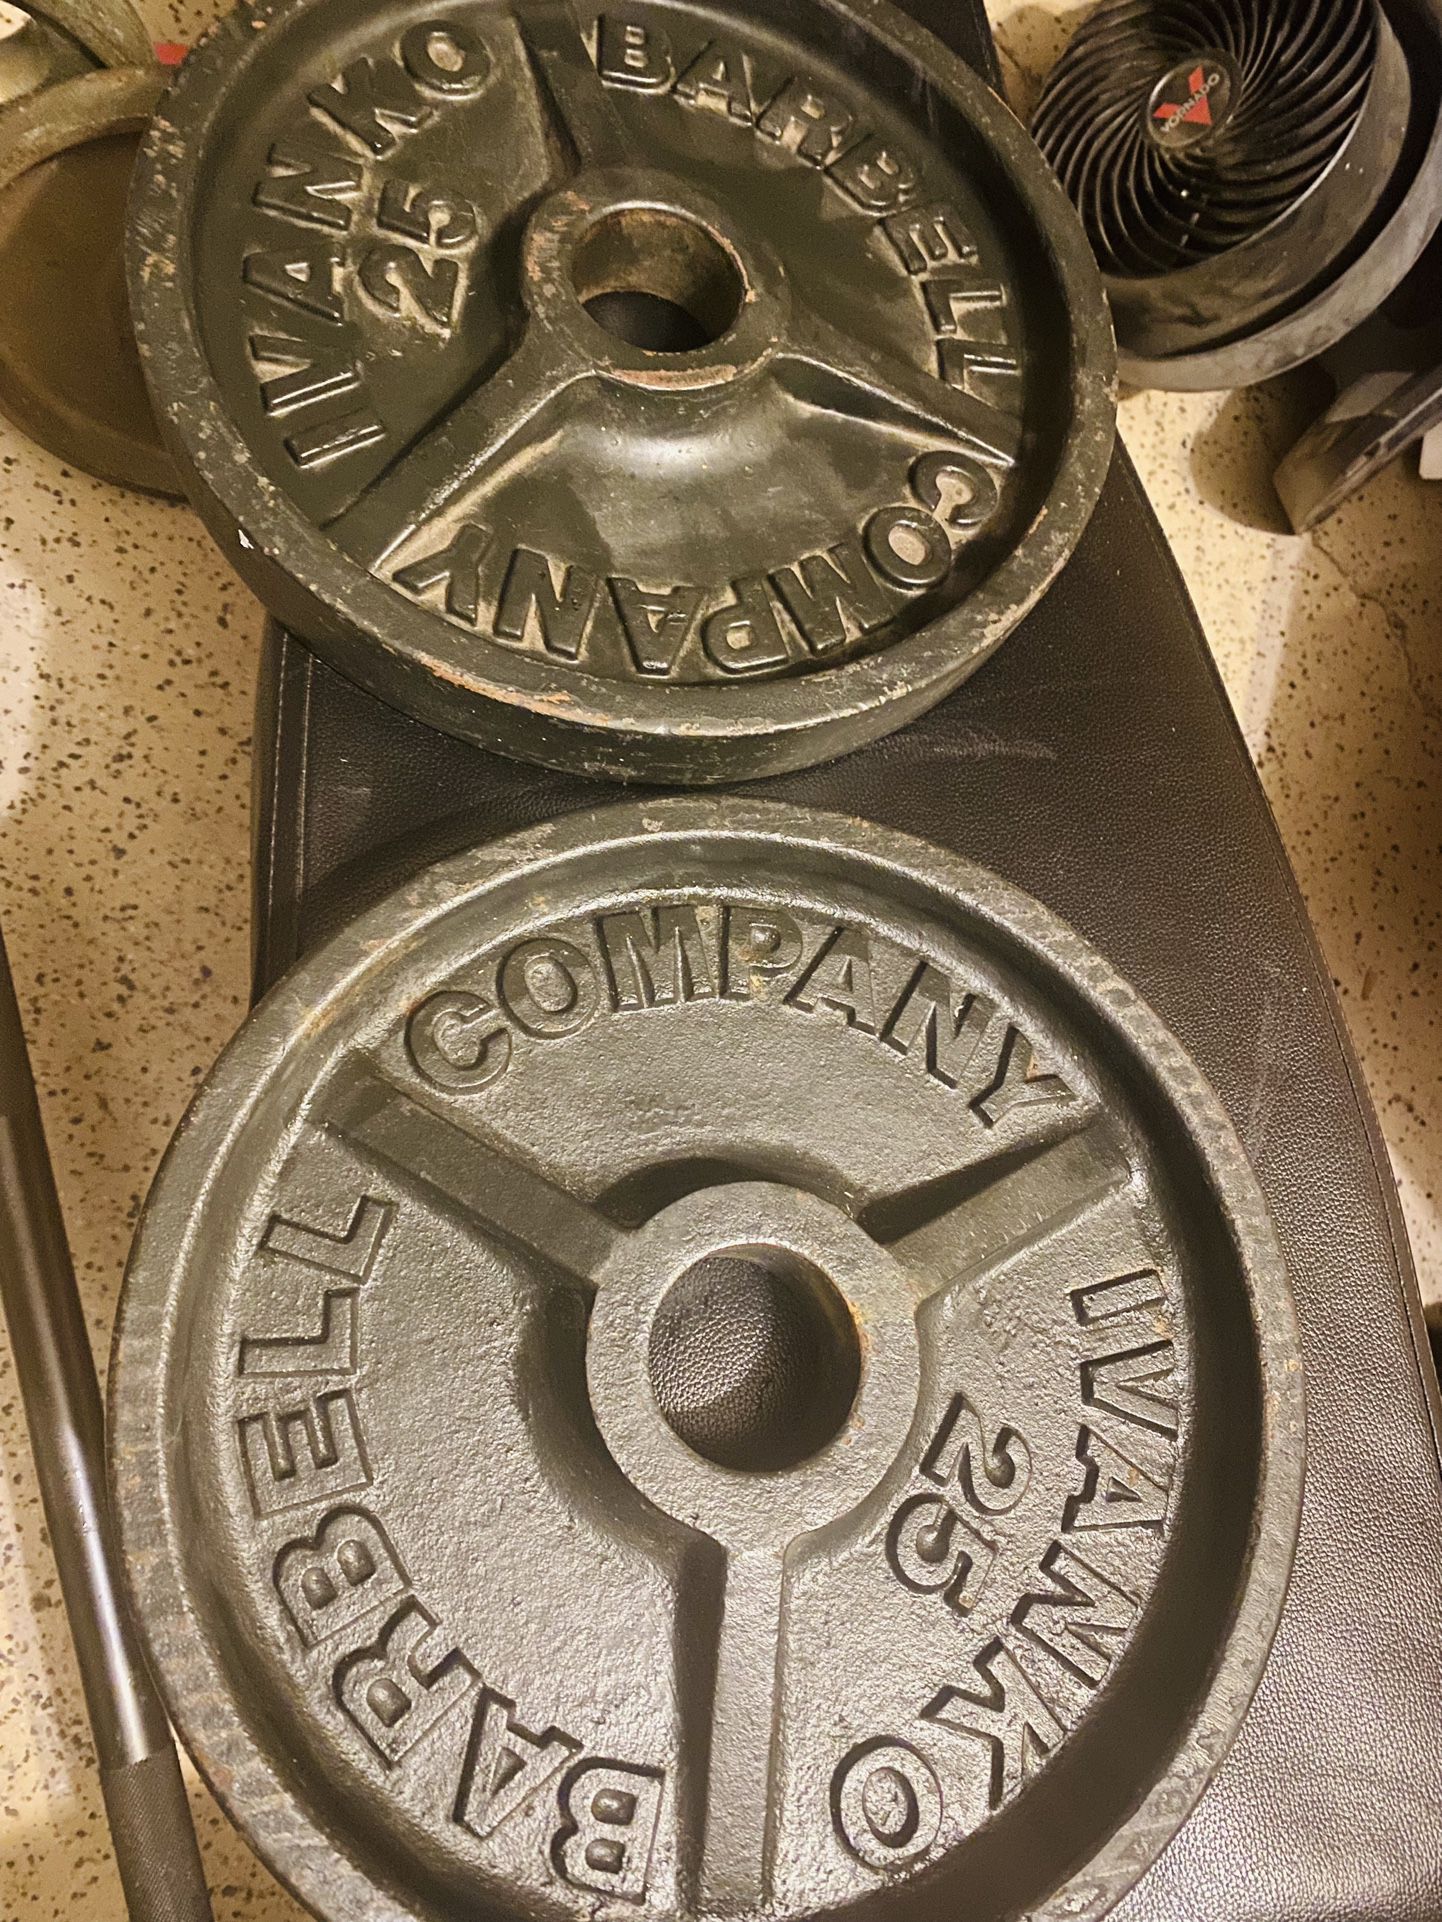 Weight Plates